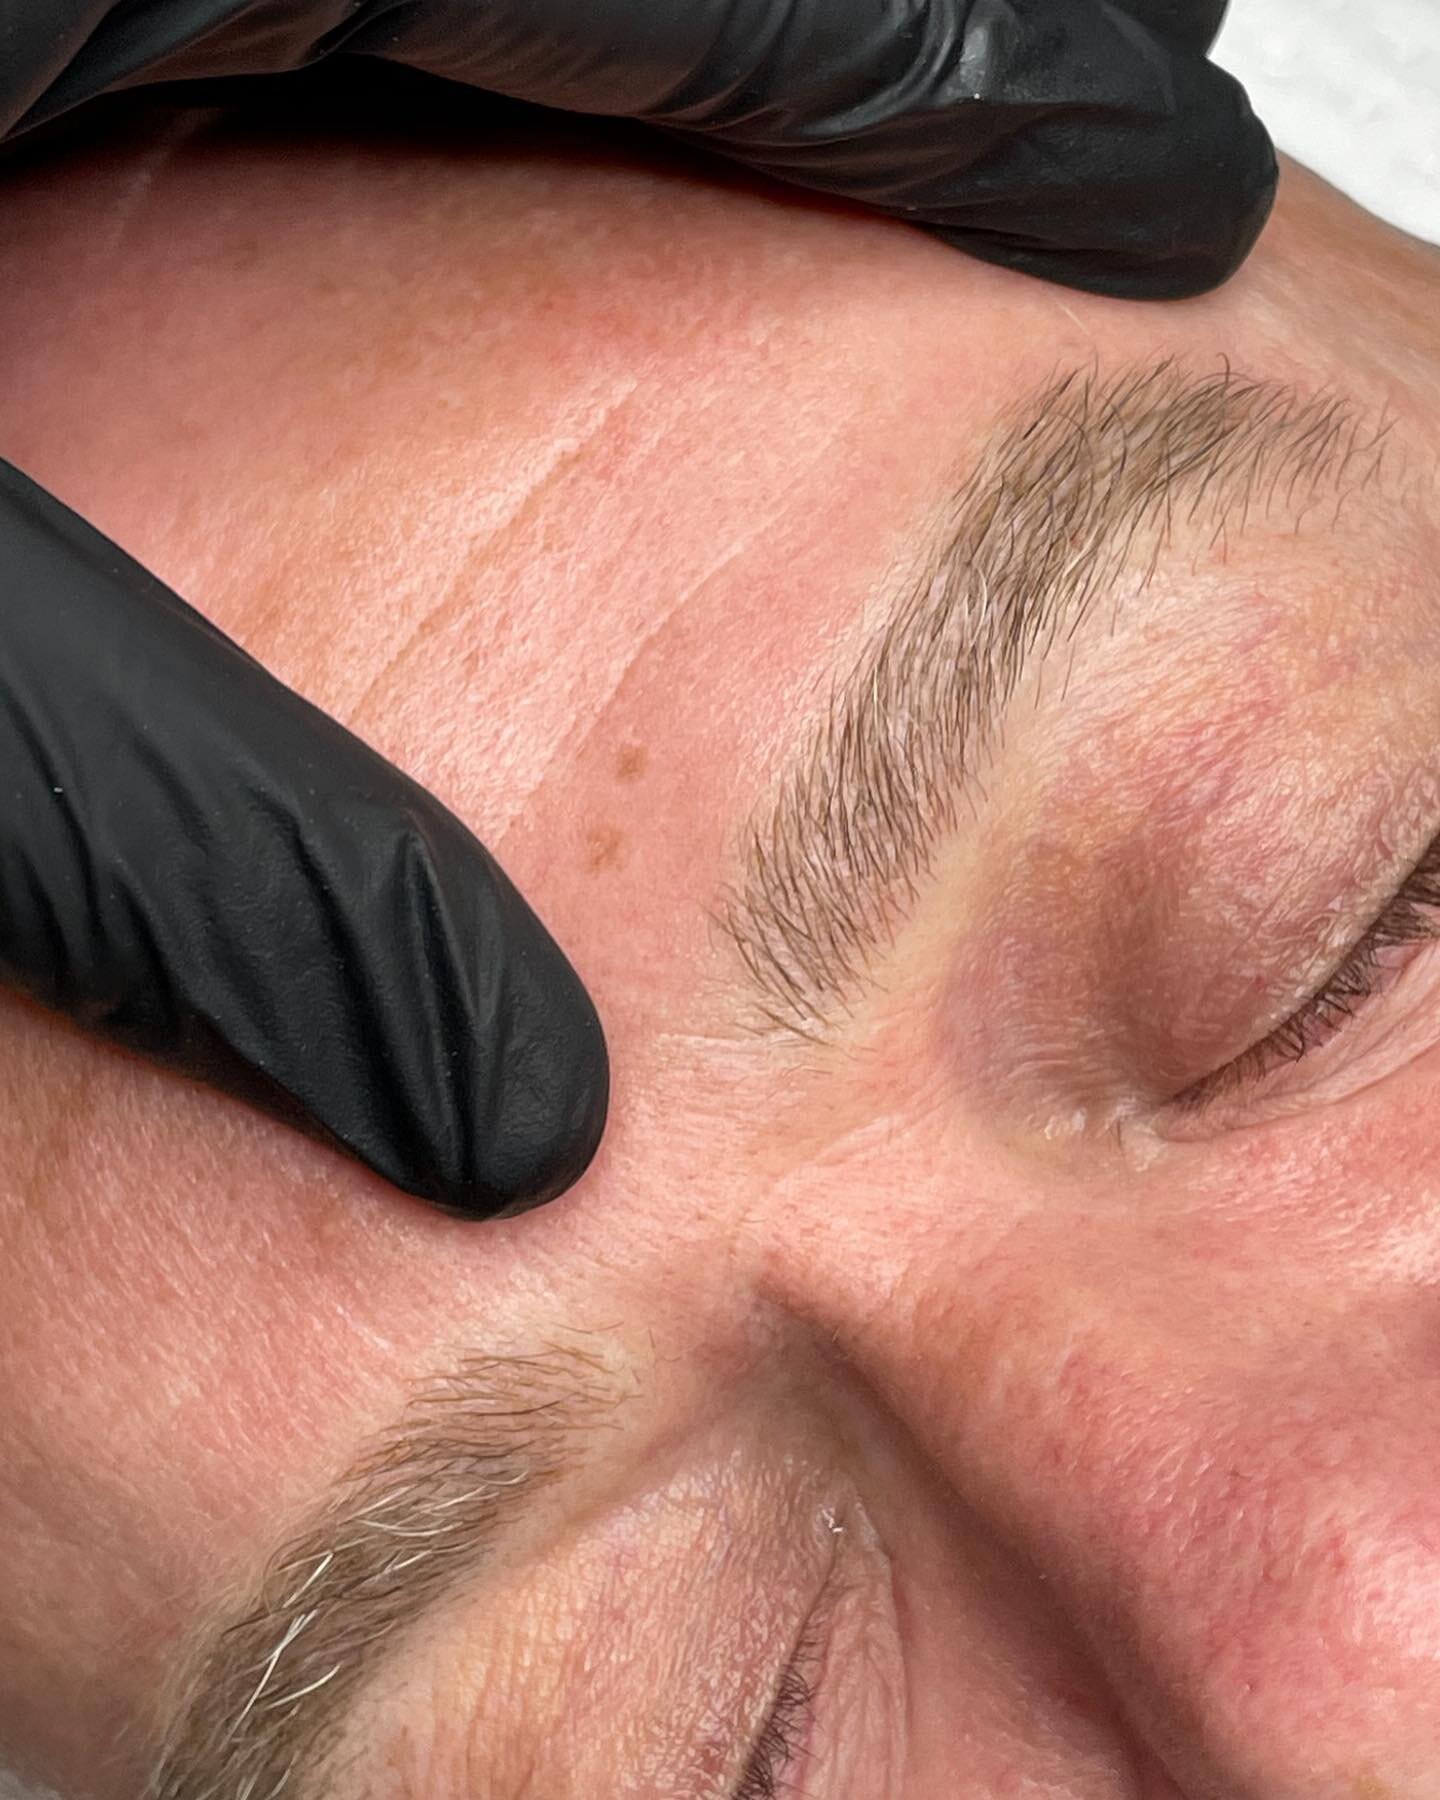 M e n &lsquo; s
M i c r o b l a d i n g 
#microbladingmen 
More and more I take enquiries from gentlemen who are curious about brow enhancing treatments for themselves.
The most common question is &ldquo;Will it look natural?&rdquo;

Brows by Lita @l